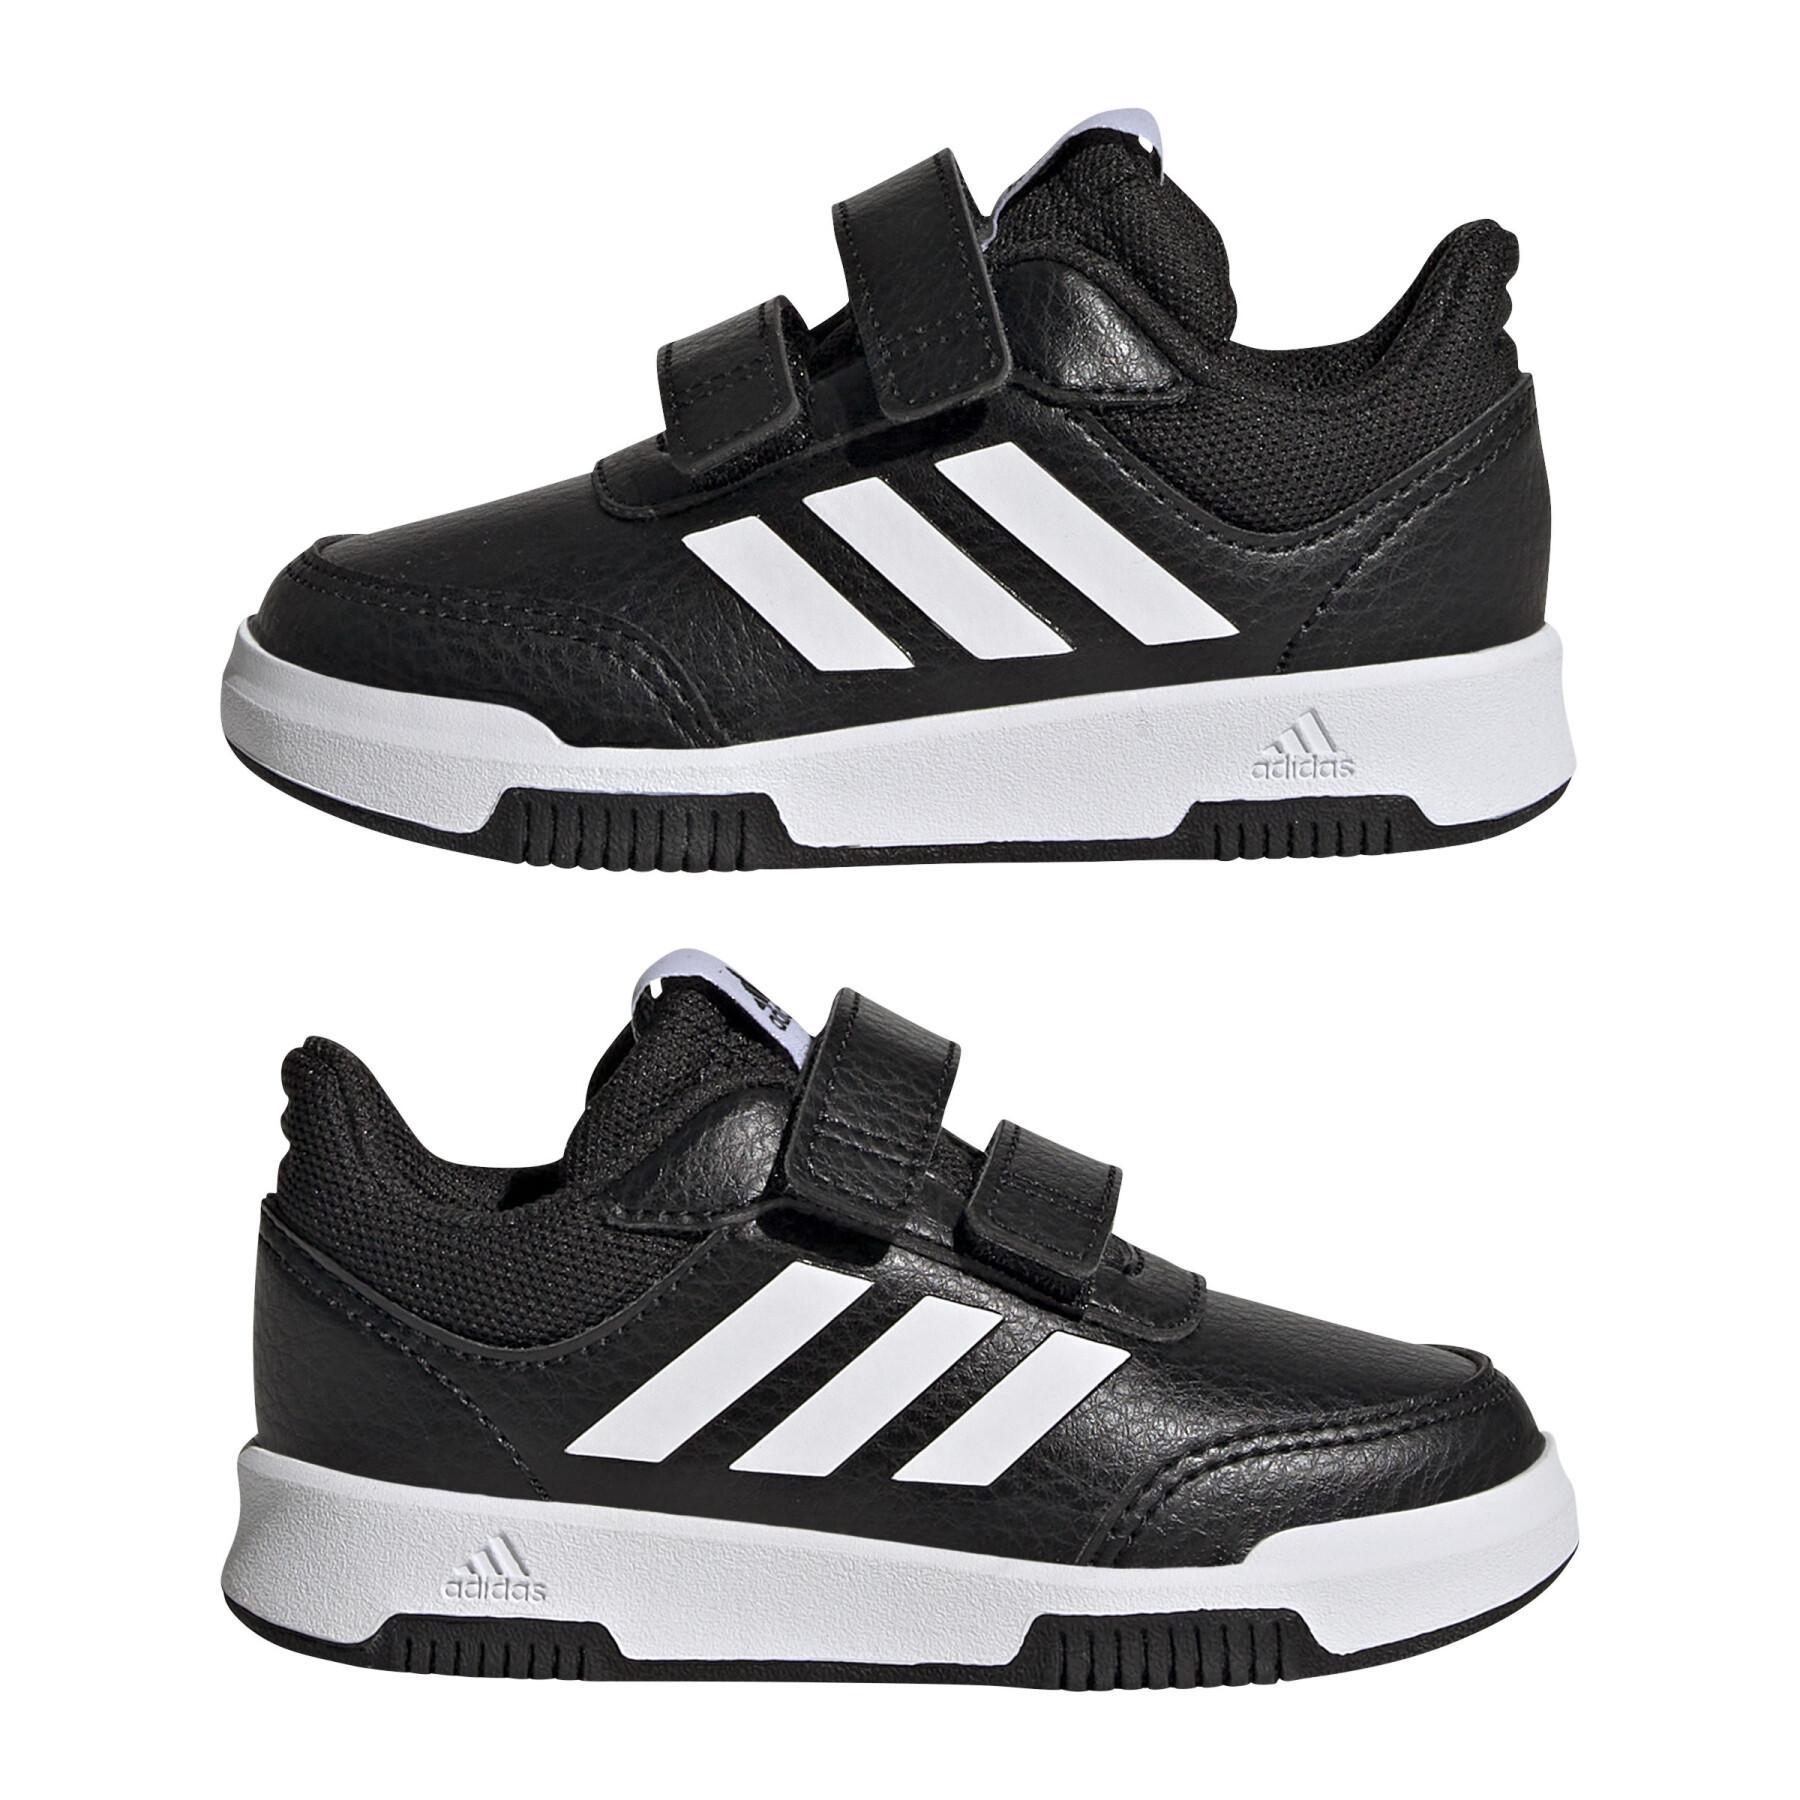 Children's lace-up running shoes adidas